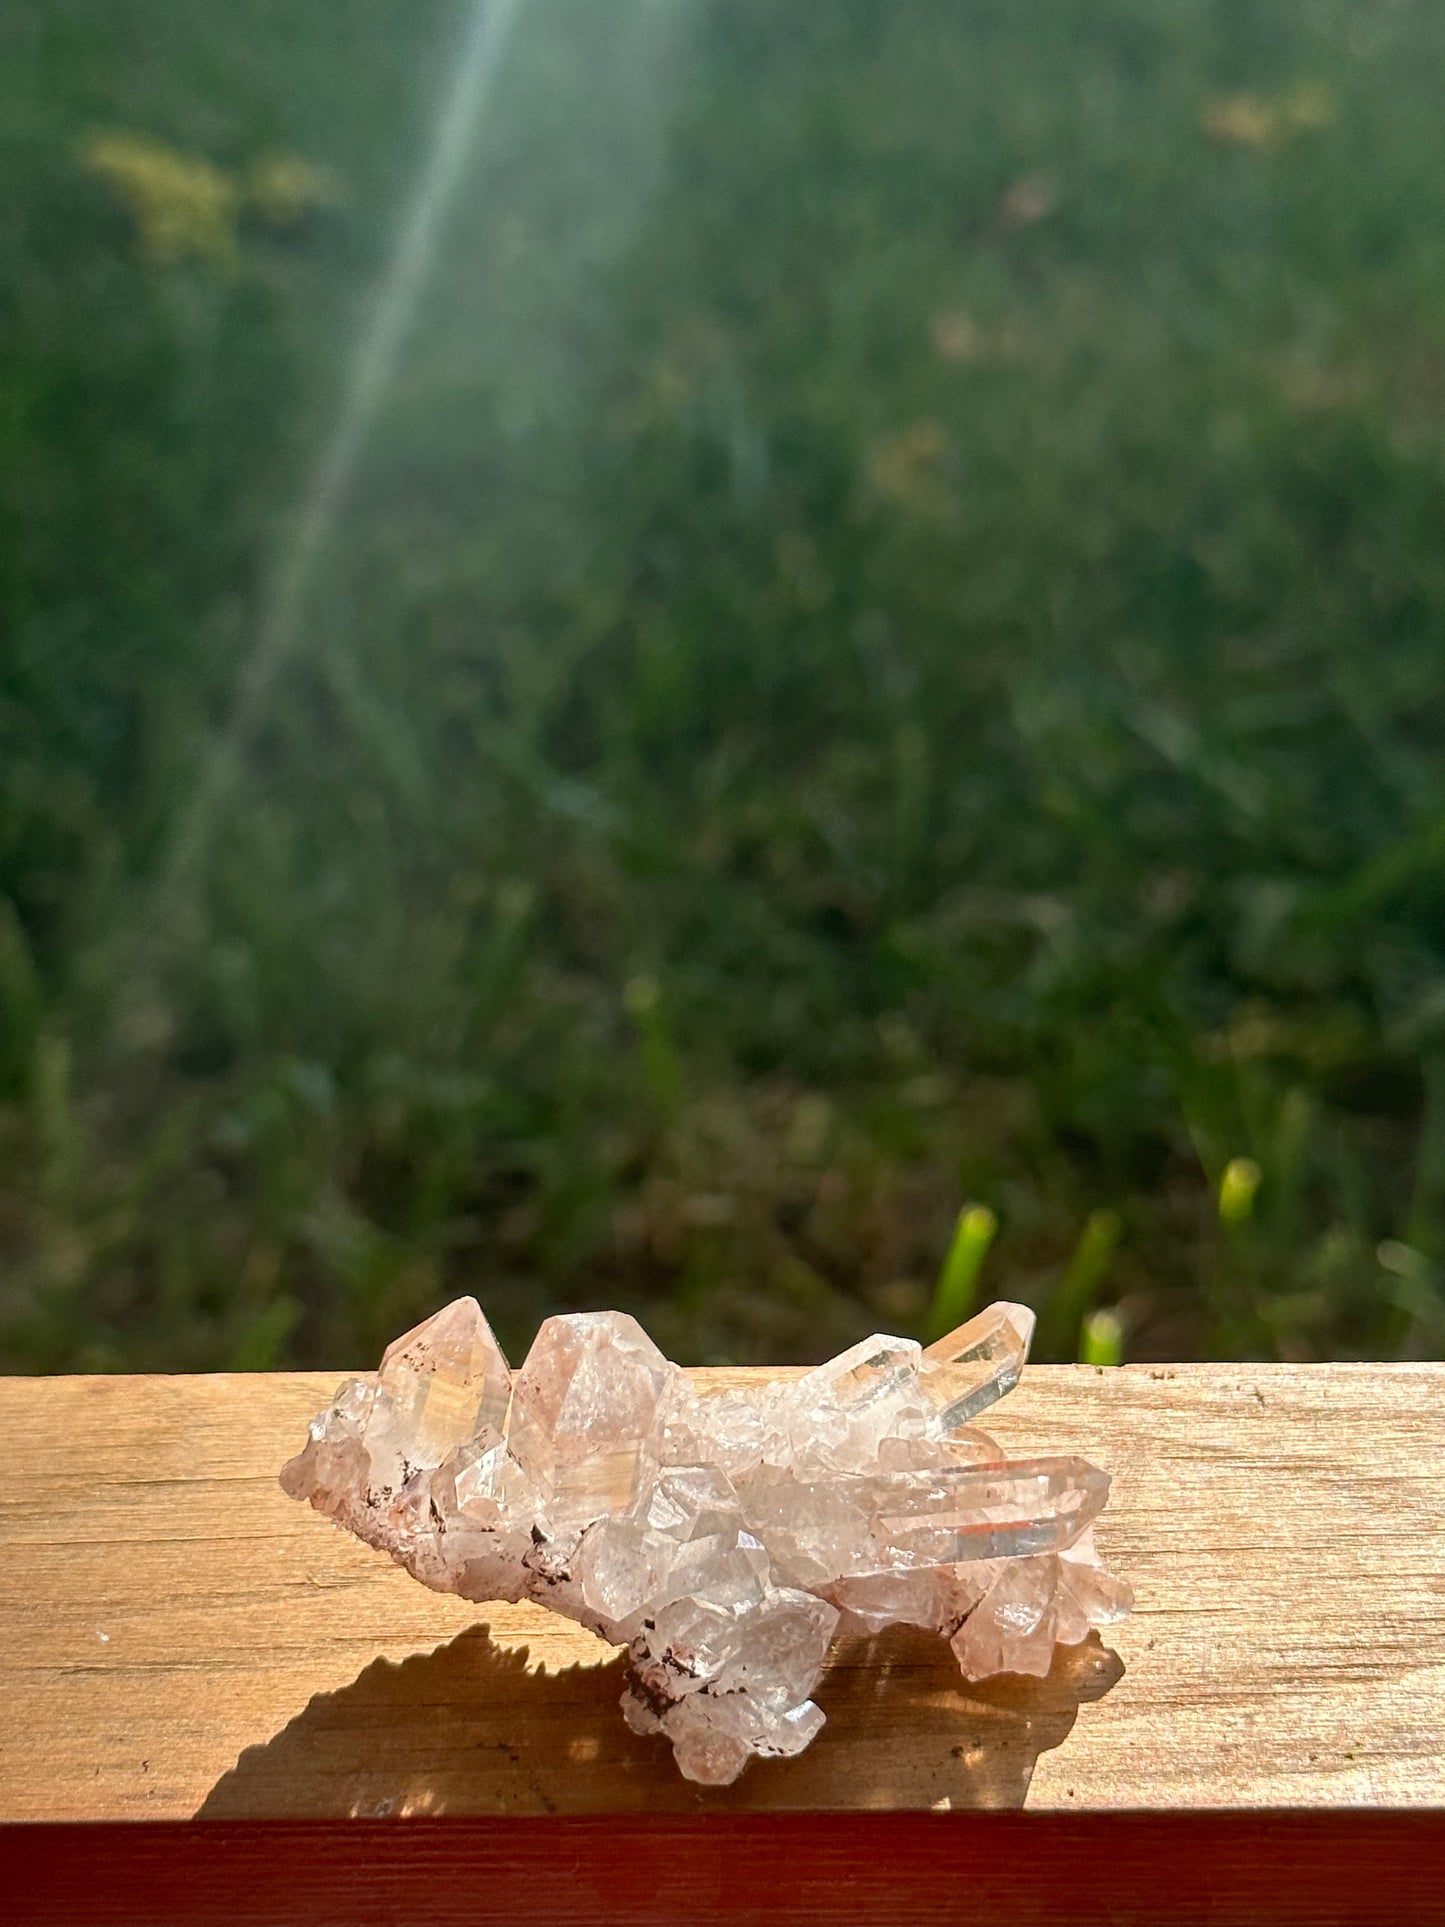 Gorgeous Pink Himalayan Quartz High Quality Genuine Crystal Specimen From India